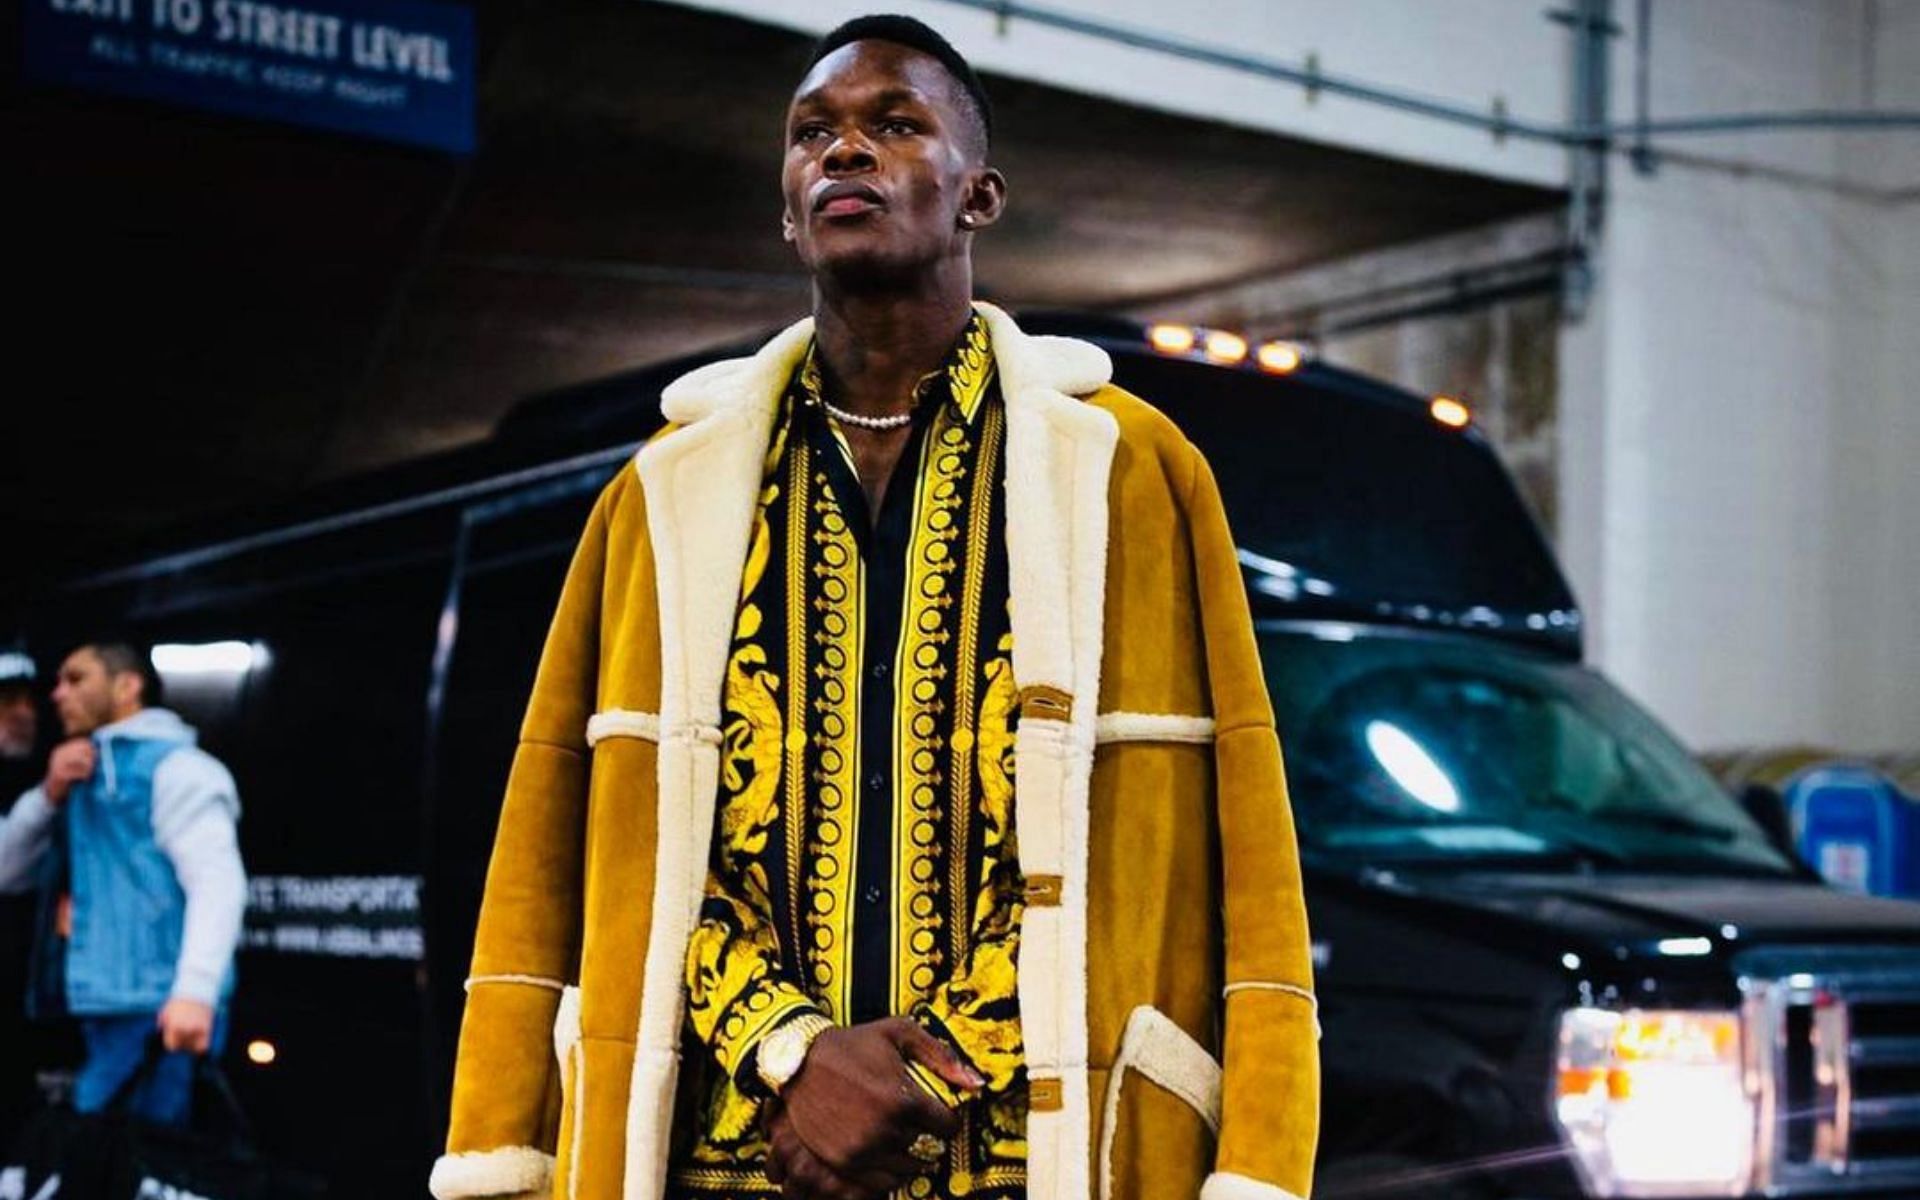 Israel Adesanya asserts his DUI case was exaggerated due to his stardom